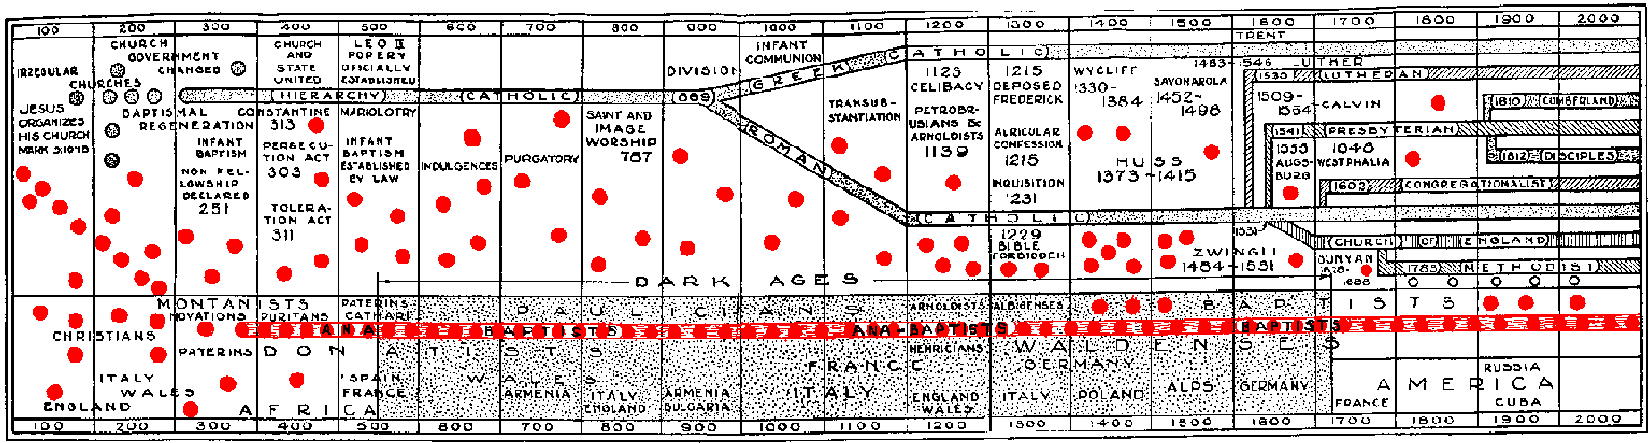 [The Trail Of Blood Chart]